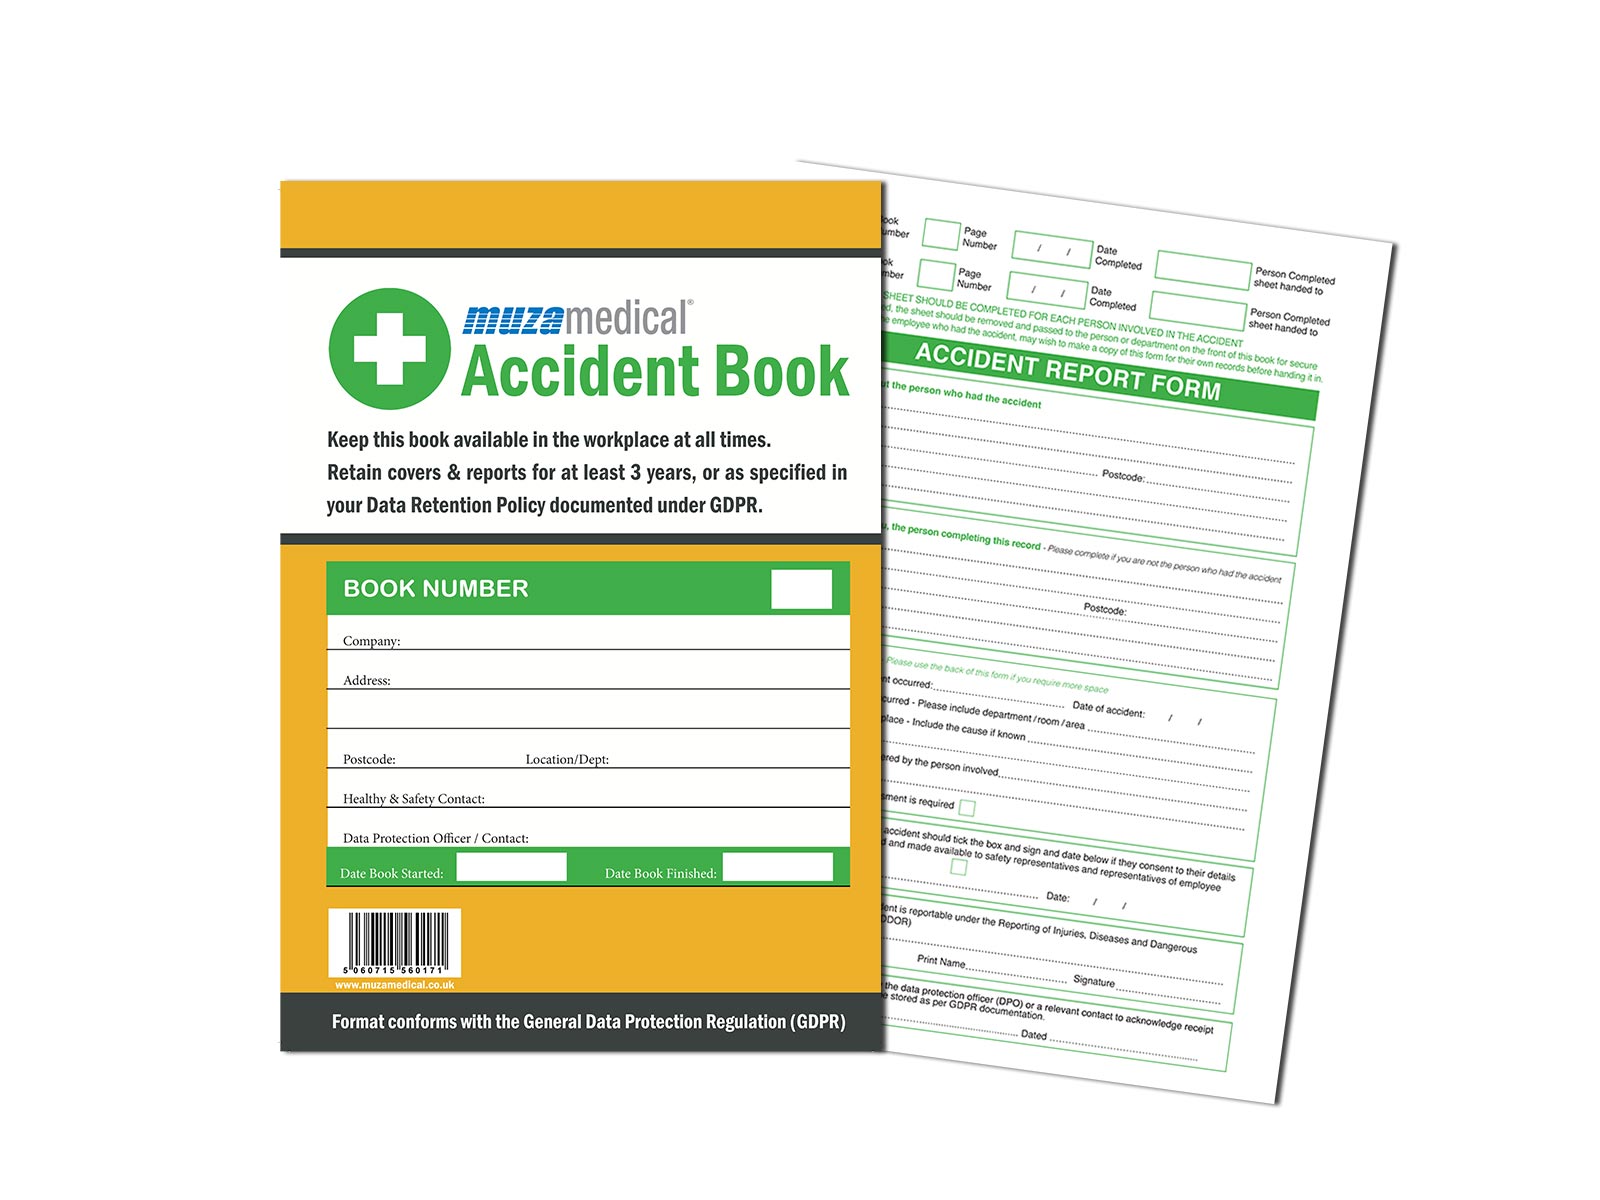 Accident Book A4 (50 perforated forms)